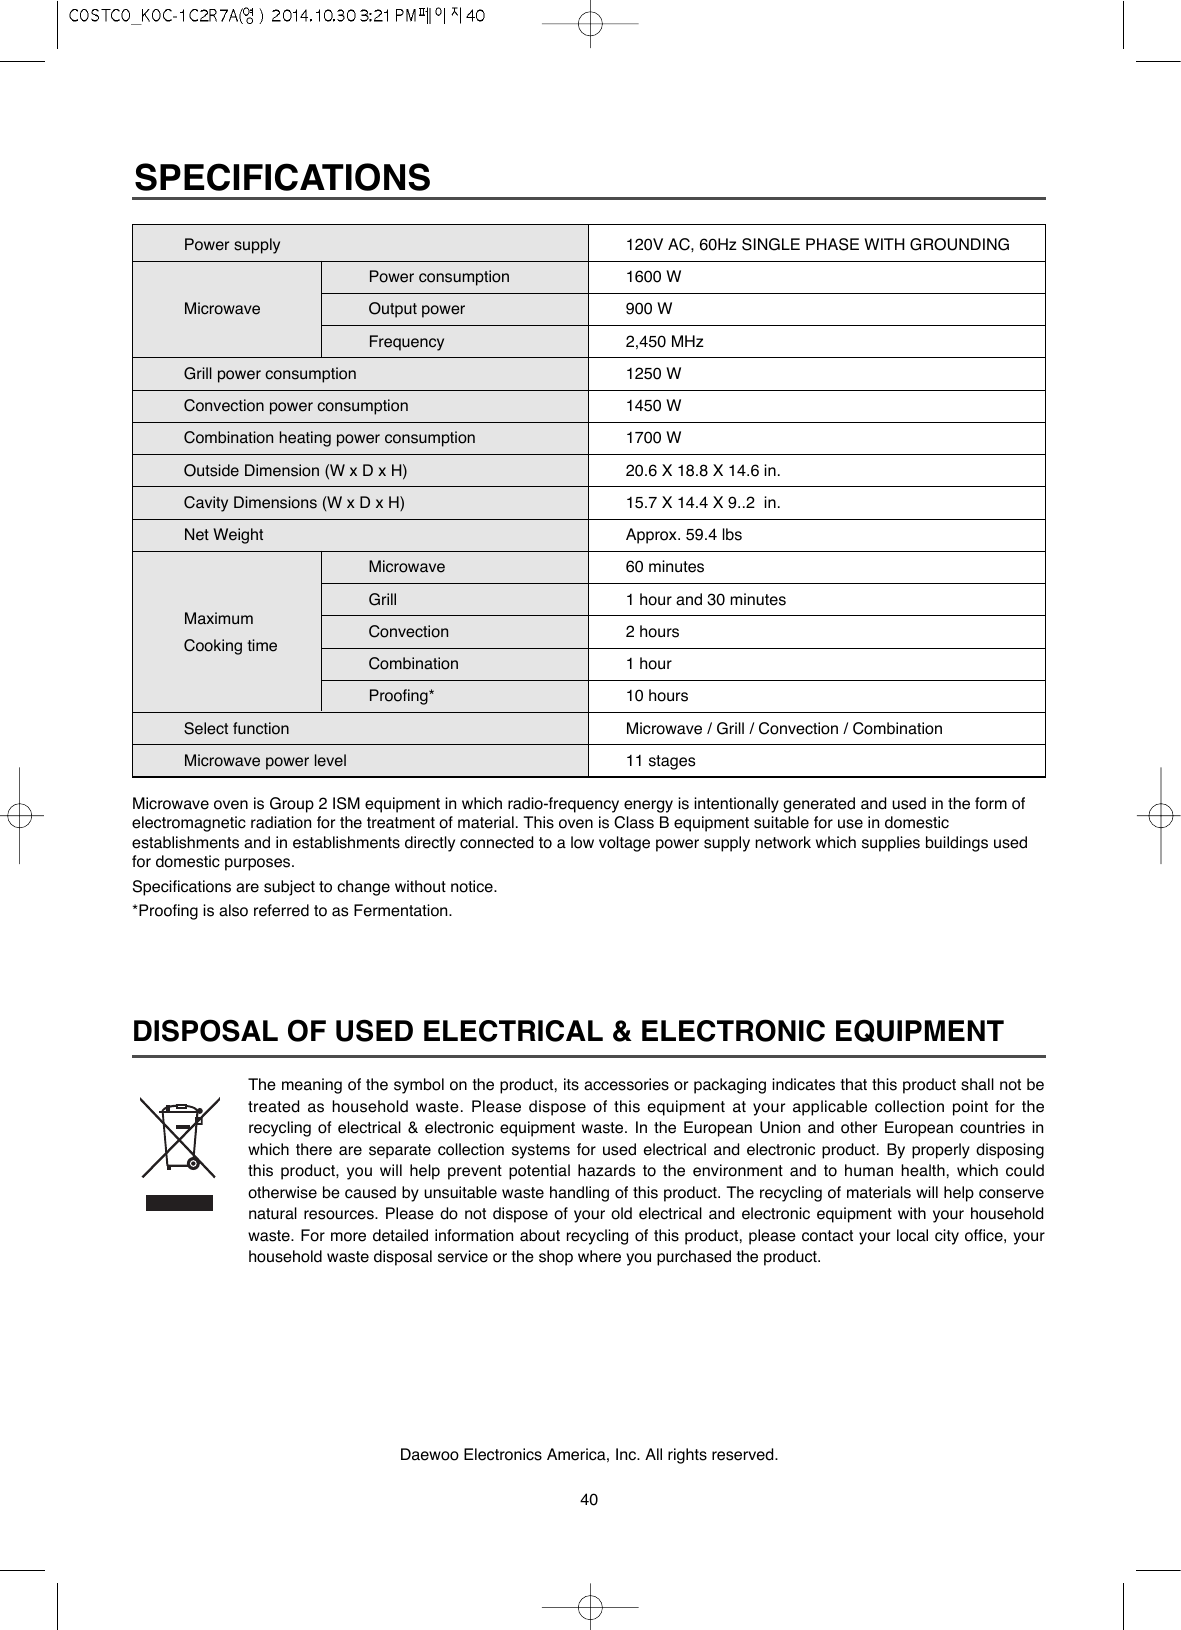 40DISPOSAL OF USED ELECTRICAL &amp; ELECTRONIC EQUIPMENTThe meaning of the symbol on the product, its accessories or packaging indicates that this product shall not betreated as household waste. Please dispose of this equipment at your applicable collection point for therecycling of electrical &amp; electronic equipment waste. In the European Union and other European countries inwhich there are separate collection systems for used electrical and electronic product. By properly disposingthis product, you will help prevent potential hazards to the environment and to human health, which couldotherwise be caused by unsuitable waste handling of this product. The recycling of materials will help conservenatural resources. Please do not dispose of your old electrical and electronic equipment with your householdwaste. For more detailed information about recycling of this product, please contact your local city office, yourhousehold waste disposal service or the shop where you purchased the product.Daewoo Electronics America, Inc. All rights reserved.Microwave oven is Group 2 ISM equipment in which radio-frequency energy is intentionally generated and used in the form ofelectromagnetic radiation for the treatment of material. This oven is Class B equipment suitable for use in domesticestablishments and in establishments directly connected to a low voltage power supply network which supplies buildings usedfor domestic purposes.Specifications are subject to change without notice.*Proofing is also referred to as Fermentation.SPECIFICATIONSPower supplyPower consumptionMicrowave Output powerFrequencyGrill power consumptionConvection power consumptionCombination heating power consumptionOutside Dimension (W x D x H)Cavity Dimensions (W x D x H)Net WeightMicrowaveGrillMaximum ConvectionCooking timeCombinationProofing*Select functionMicrowave power level120V AC, 60Hz SINGLE PHASE WITH GROUNDING1600 W900 W2,450 MHz1250 W1450 W1700 W20.6 X 18.8 X 14.6 in.15.7 X 14.4 X 9..2  in.Approx. 59.4 lbs60 minutes1 hour and 30 minutes2 hours1 hour10 hoursMicrowave / Grill / Convection / Combination11 stages